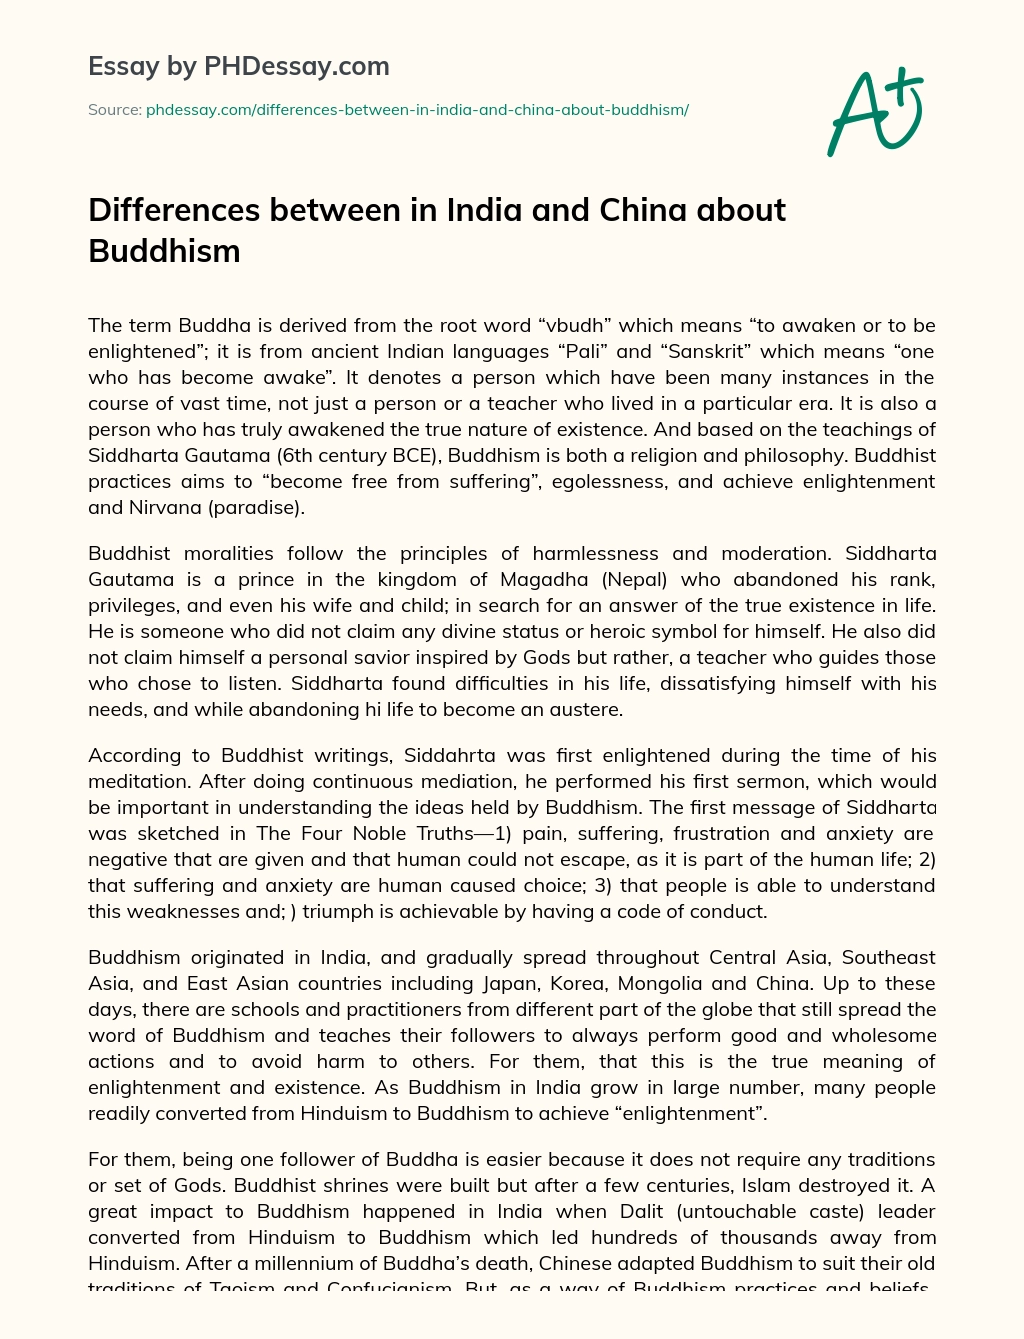 Differences between in India and China about Buddhism essay